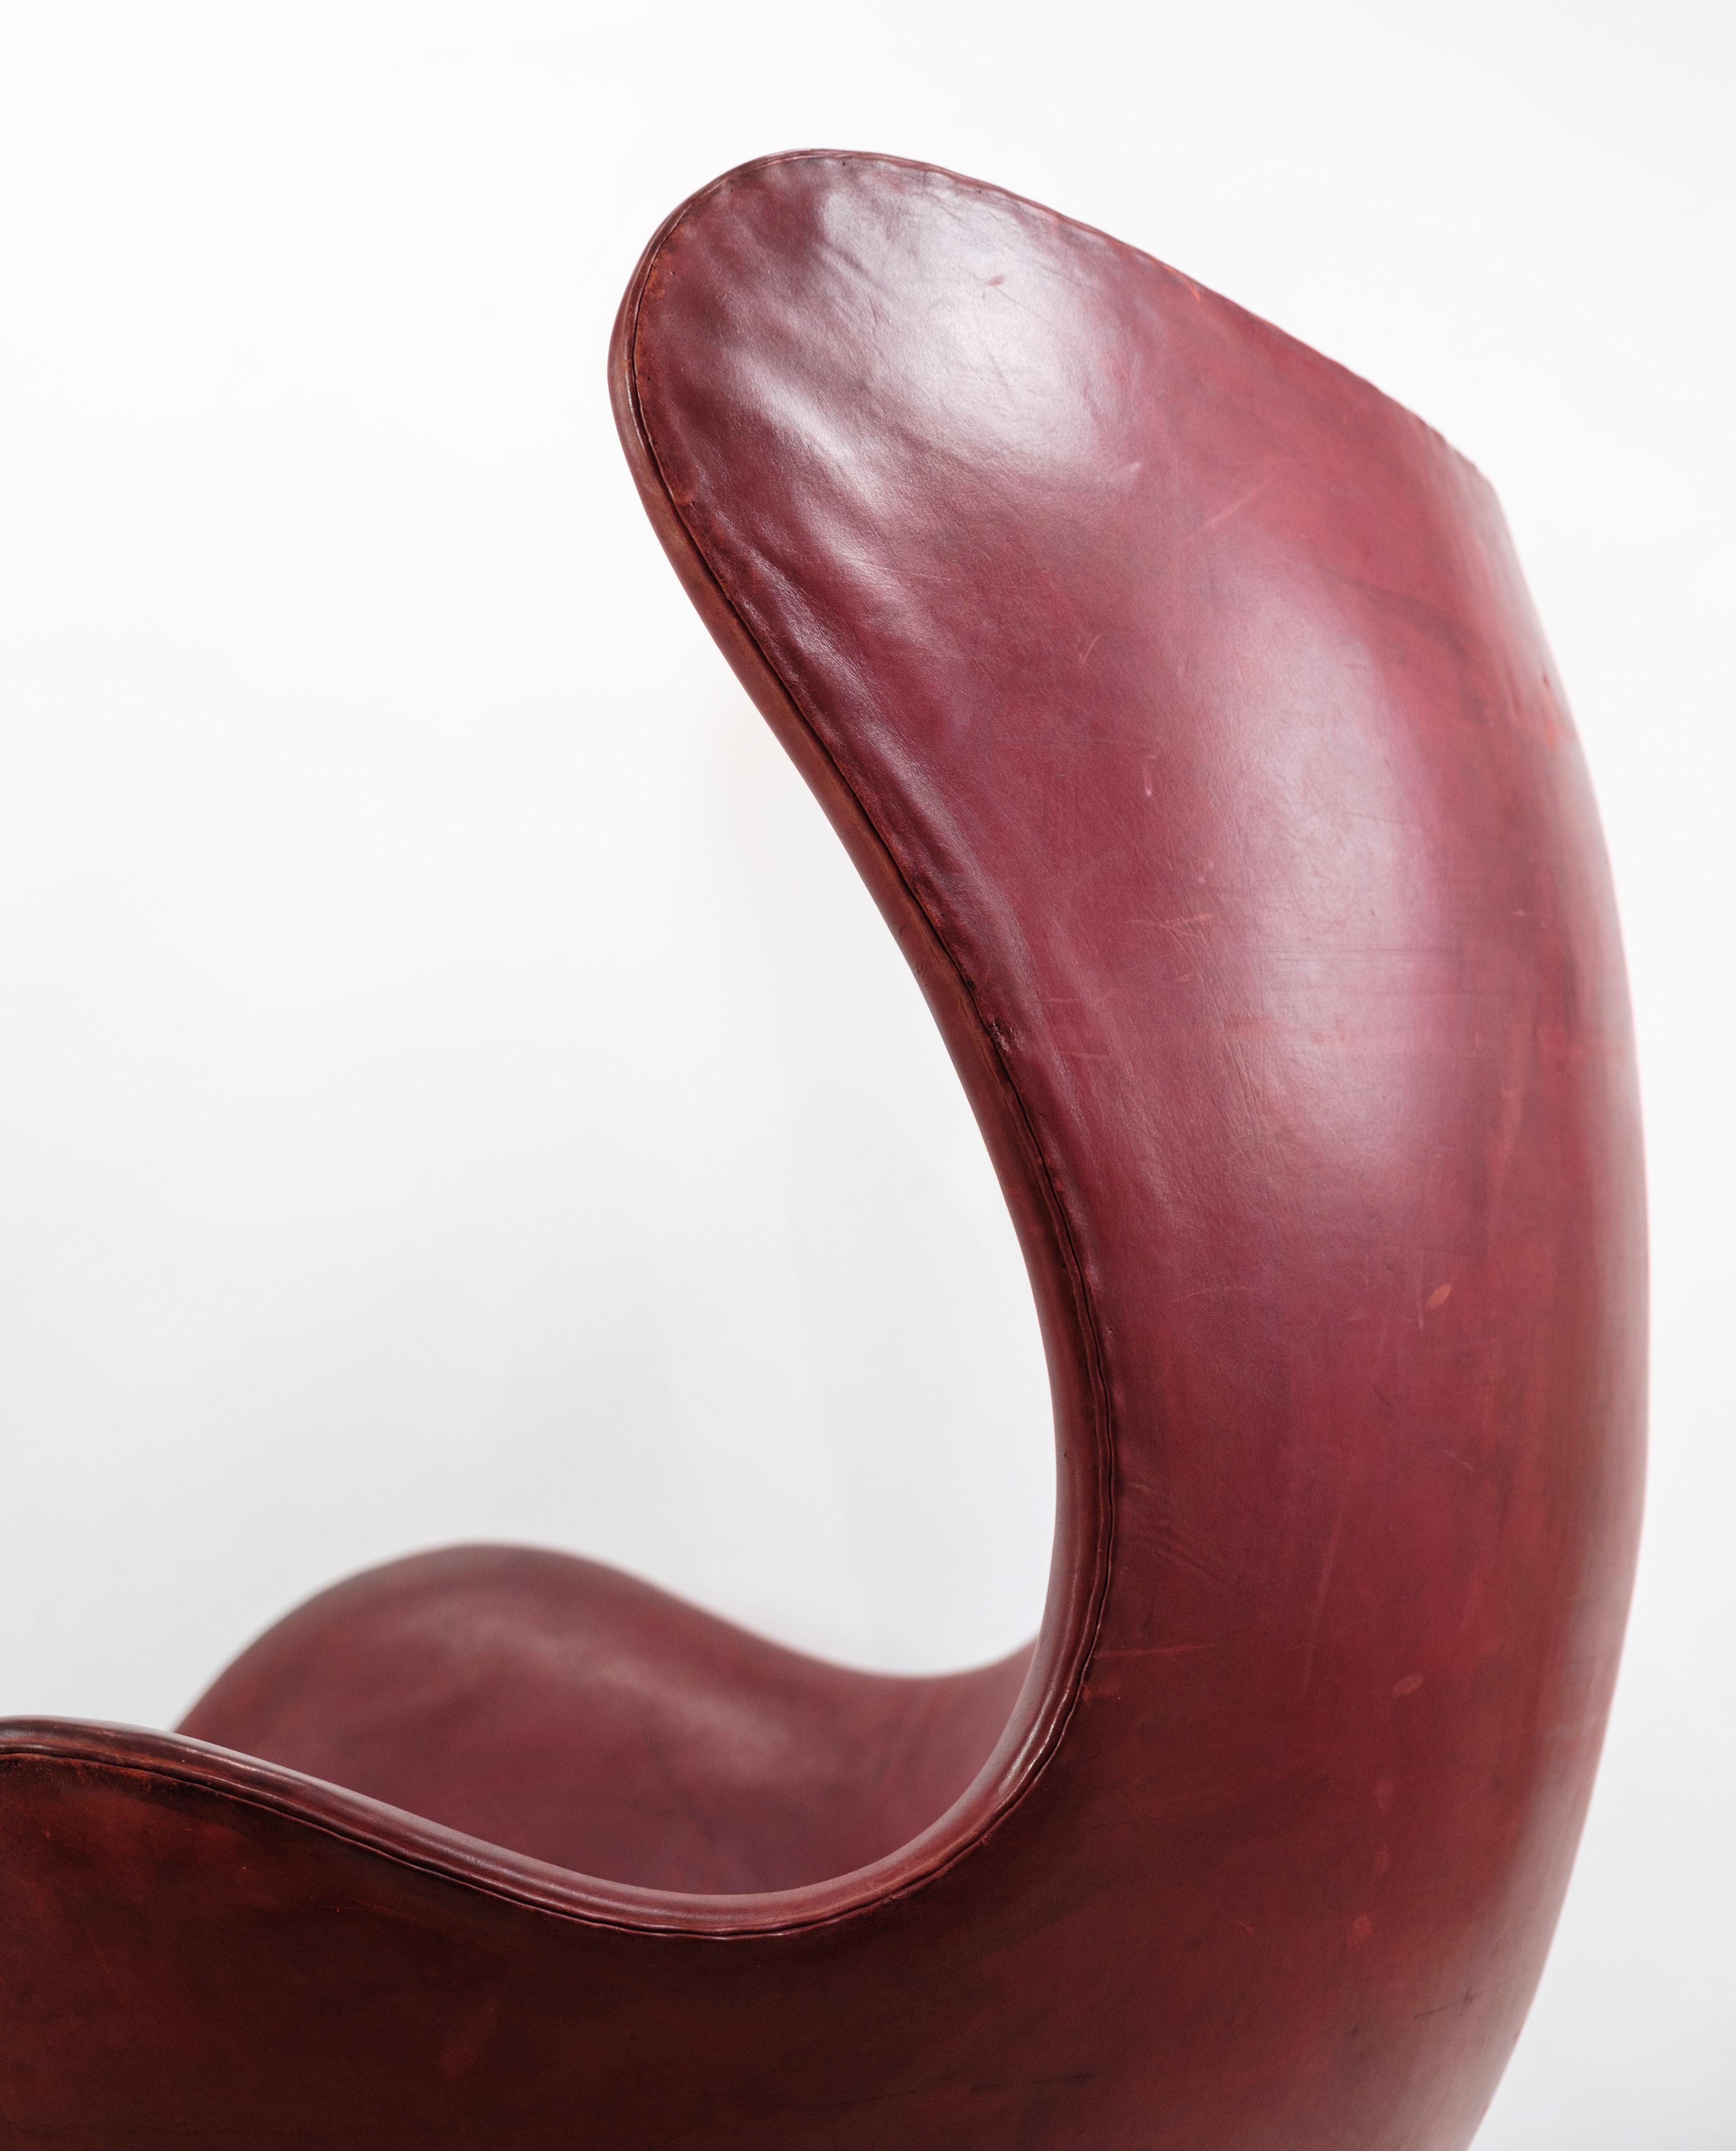 The Egg, model 3316, is an iconic design chair created by the renowned Danish designer Arne Jacobsen in 1958. The chair is produced by Fritz Hansen, one of Denmark's leading furniture manufacturers, and was manufactured in 1963.

The chair is a